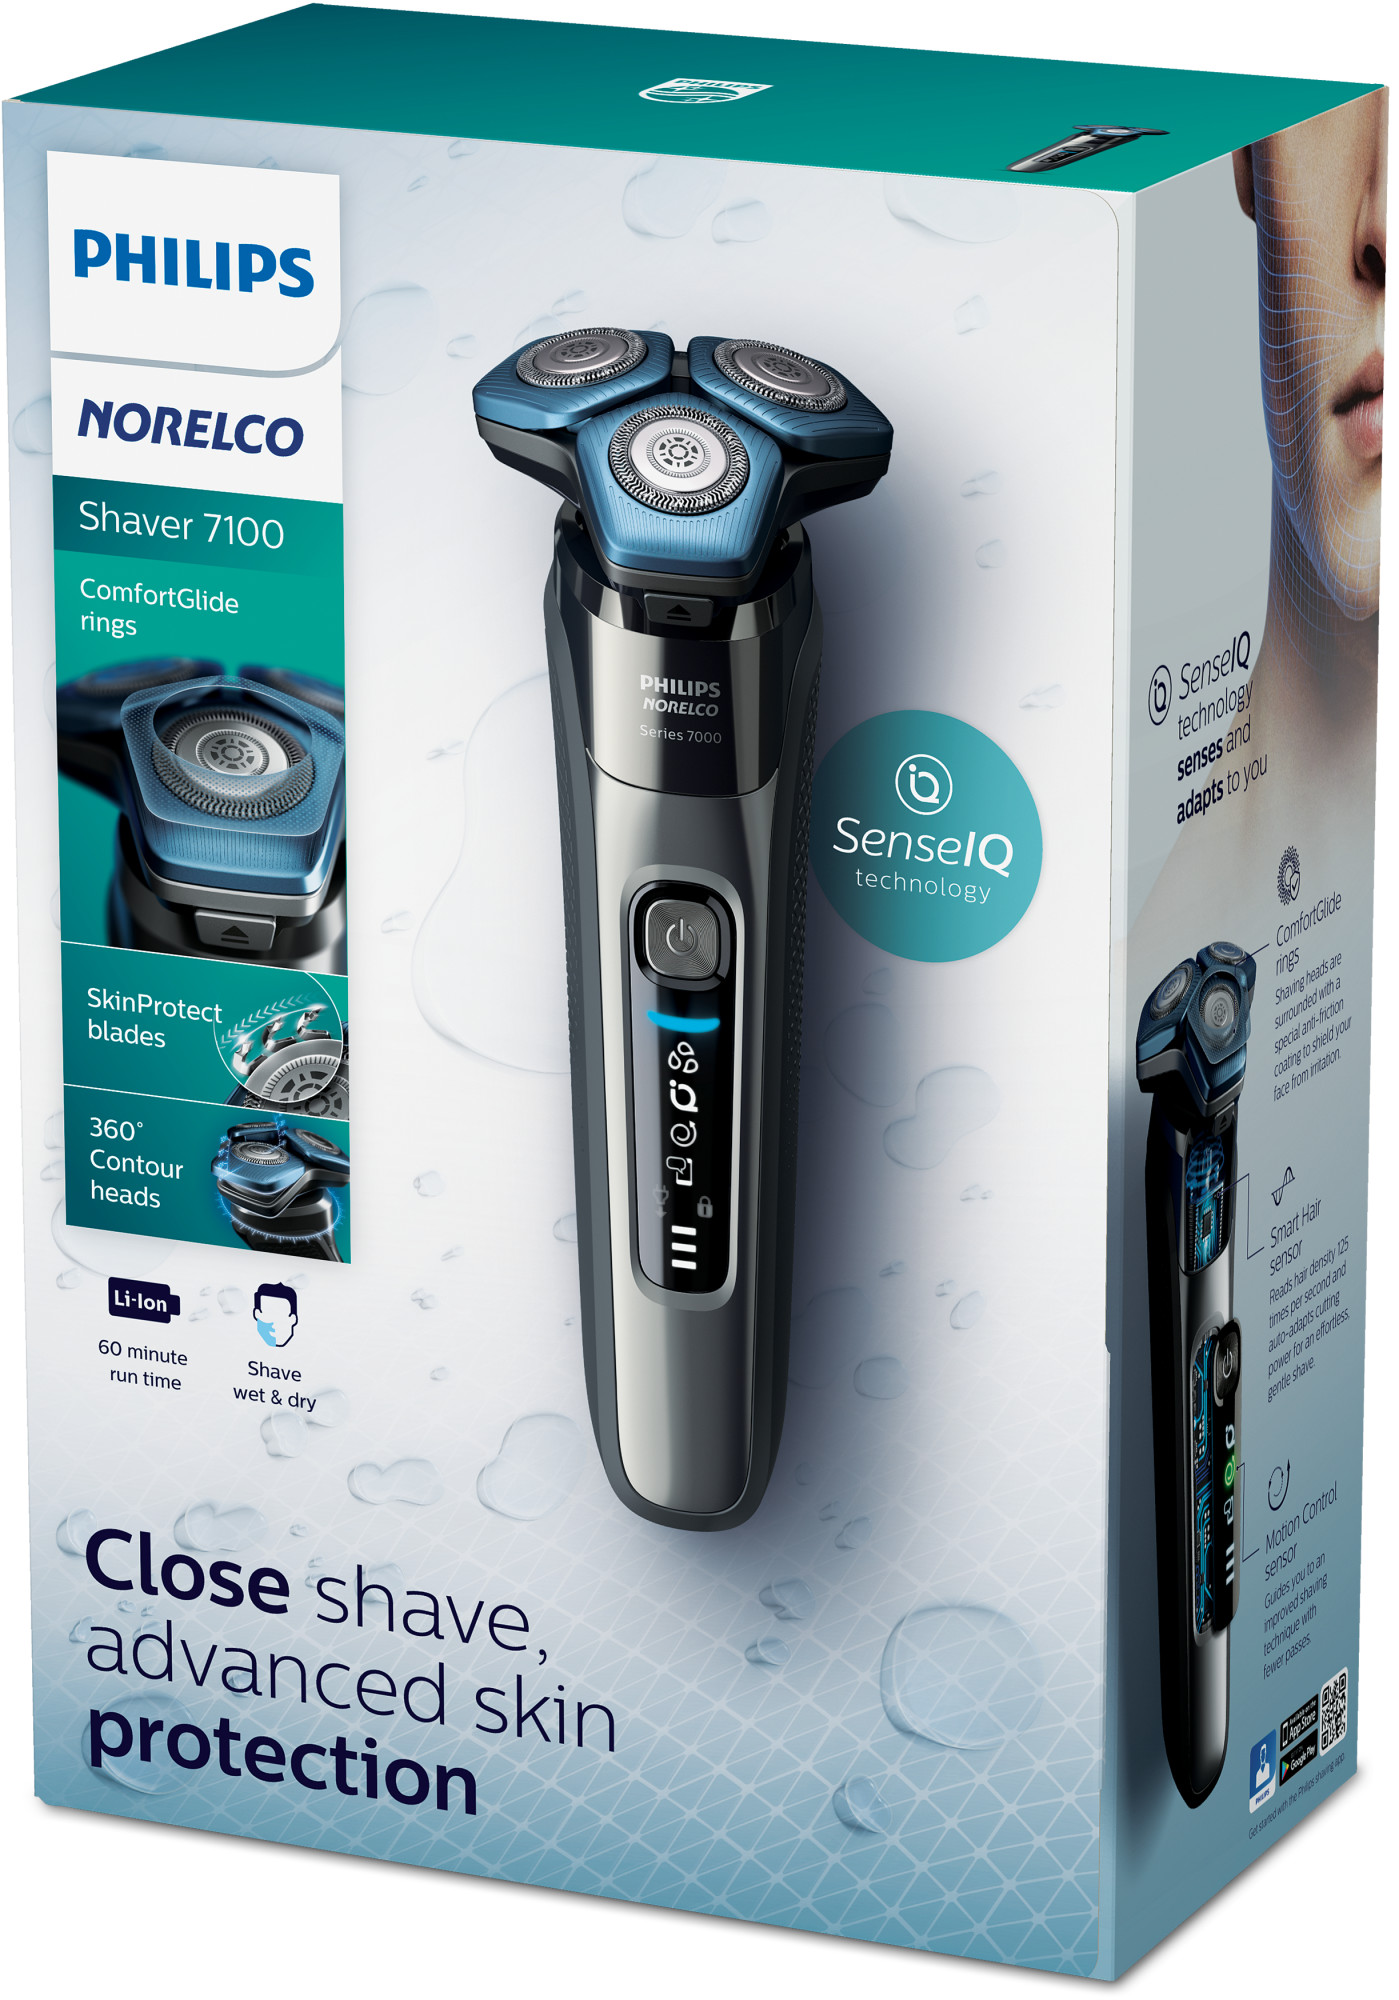 Philips Norelco Shaver 7100, Rechargeable Wet ＆ Dry Electric Shaver with SenseIQ Technology and Pop-up Trimmer S7788 82並行輸入